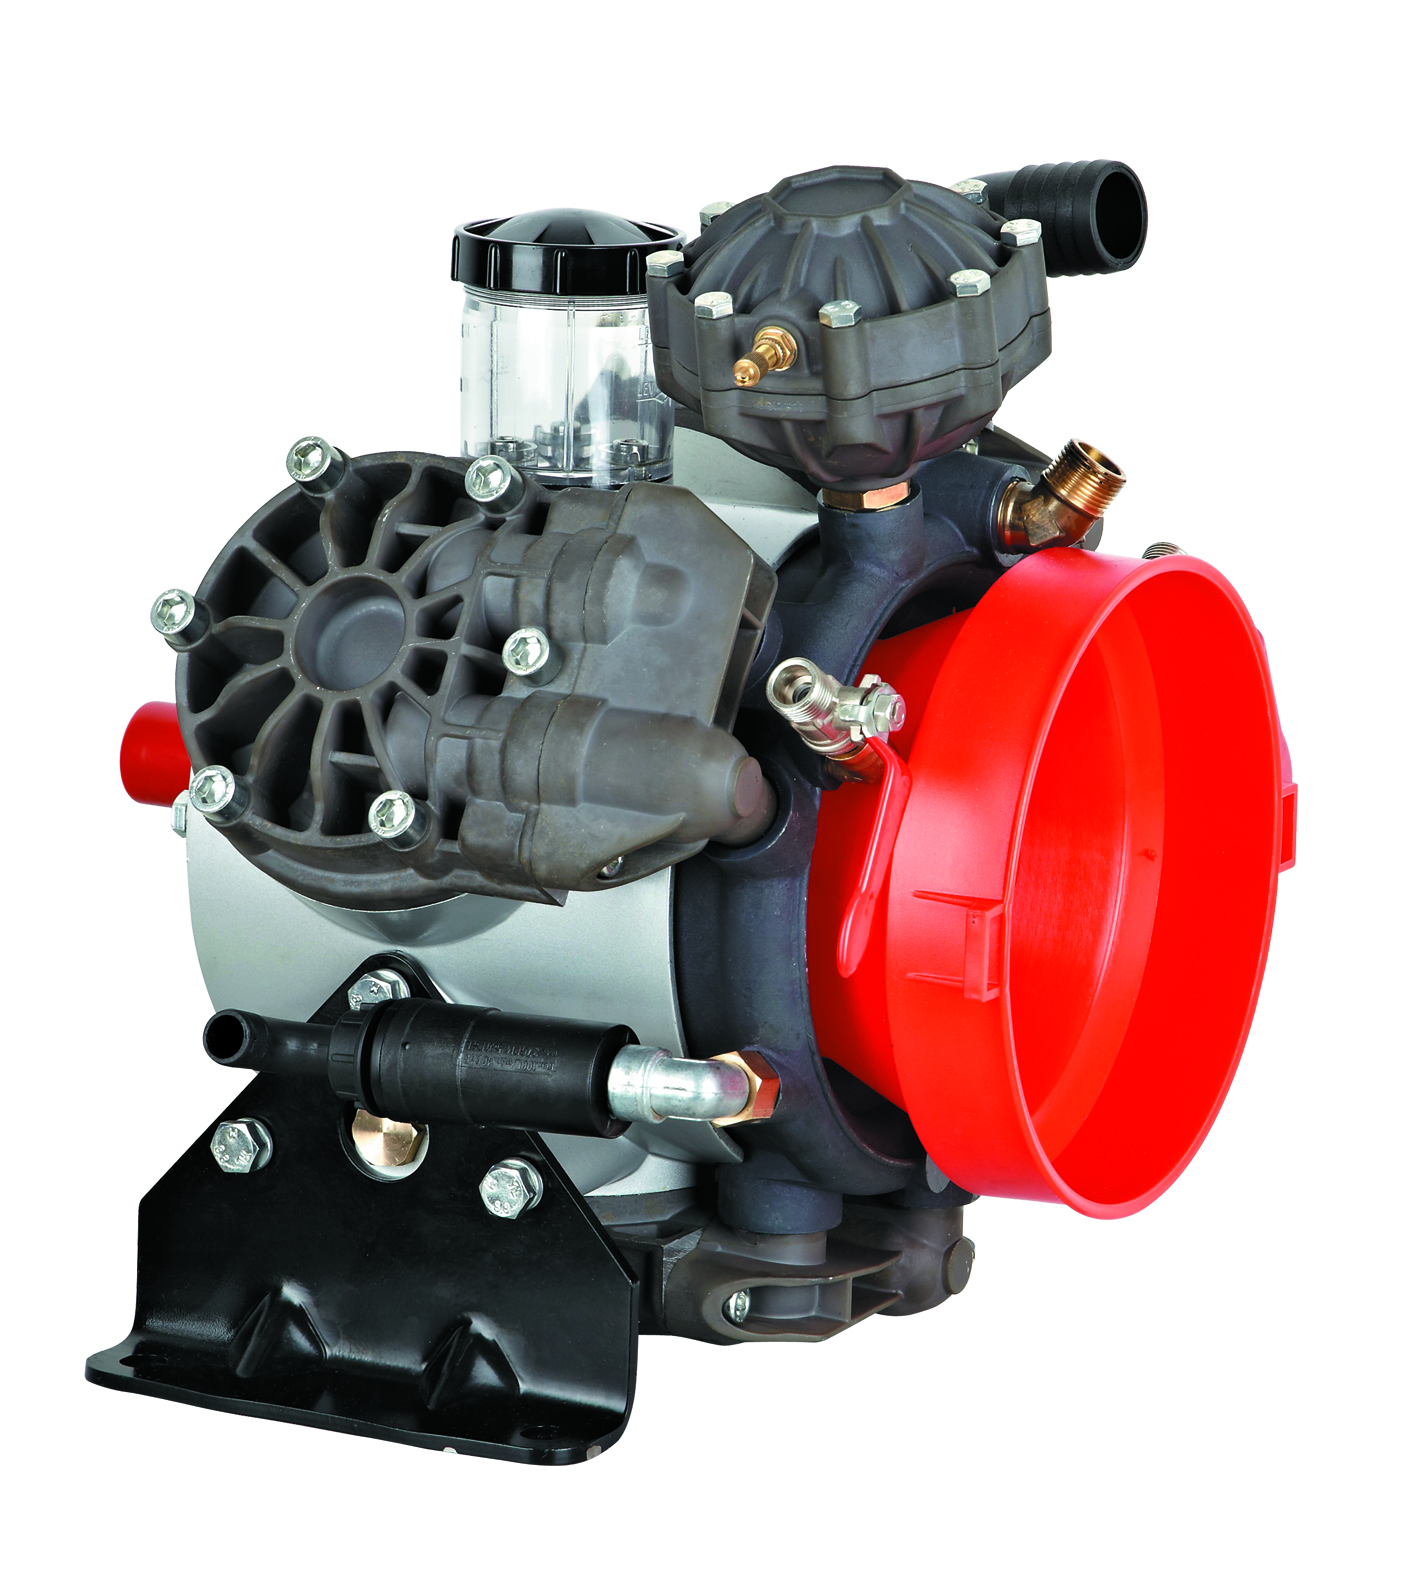 Diaphragm pump GMB130 for agricultural tractor sprayer use